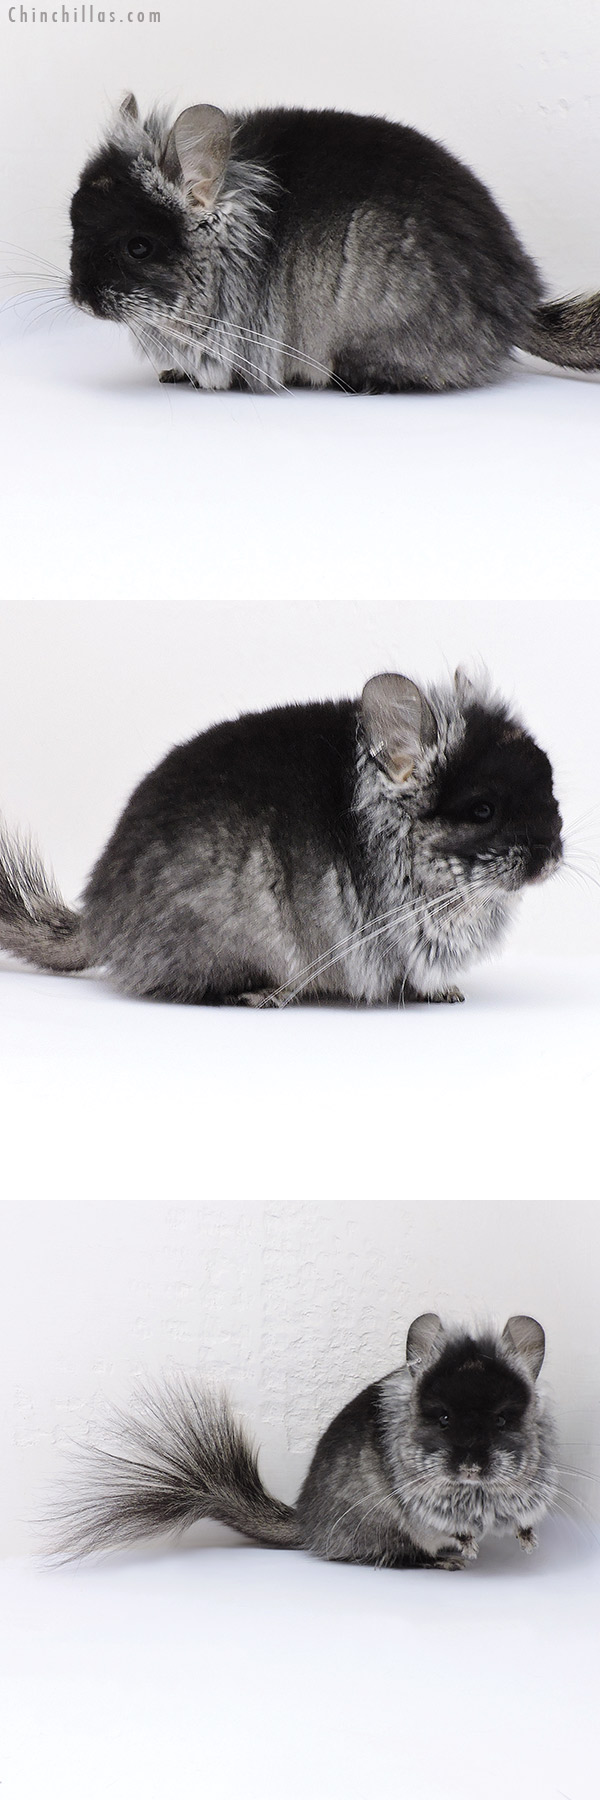 Chinchilla or related item offered for sale or export on Chinchillas.com - 17085 Exceptional Black Velvet ( Violet Carrier ) G2  Royal Persian Angora Male Chinchilla with Lion Mane